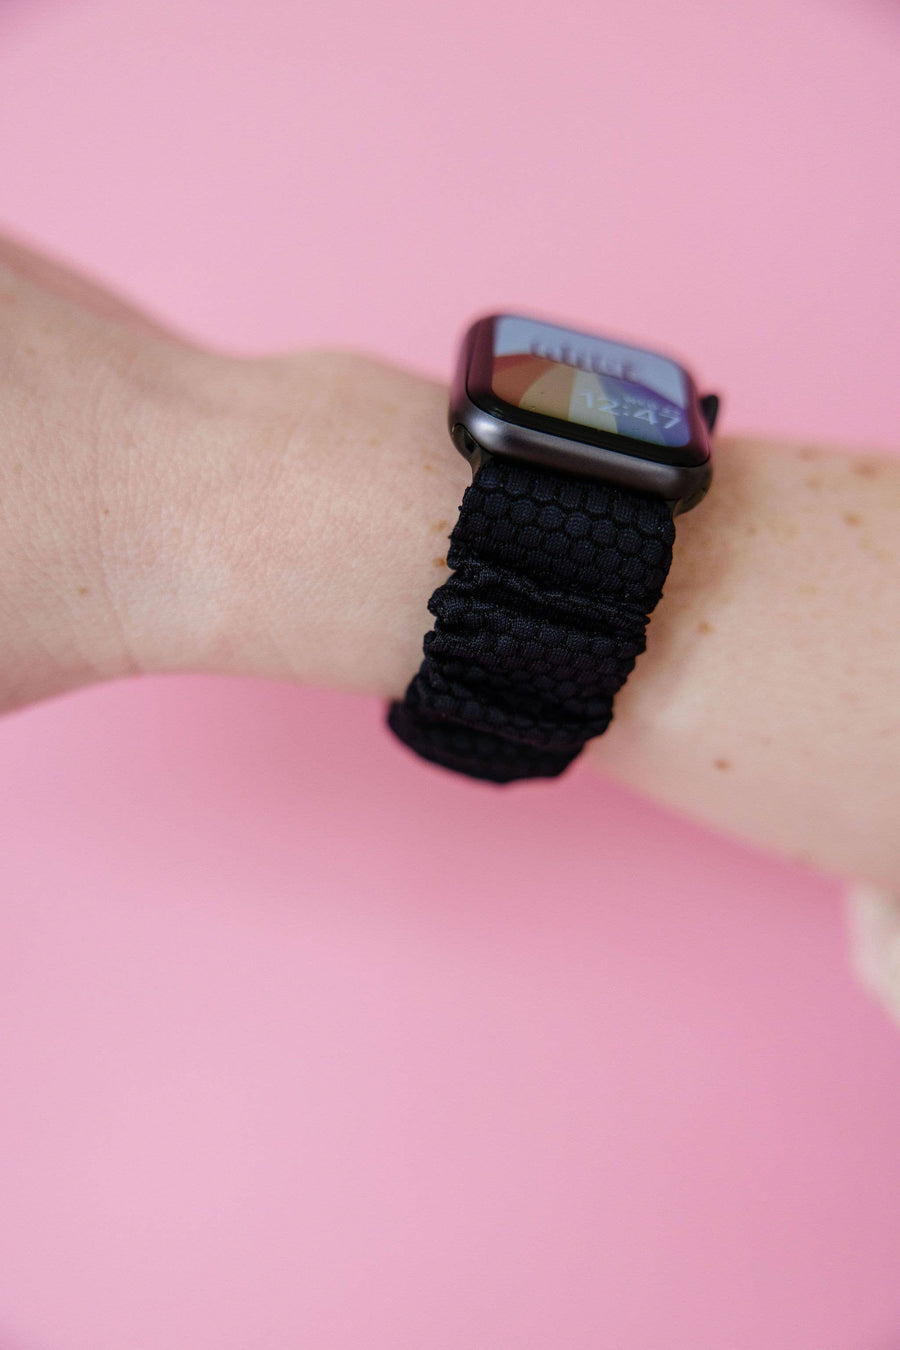 Black Hexagon Athletic Scrunchie Band Compatible with Apple Watch